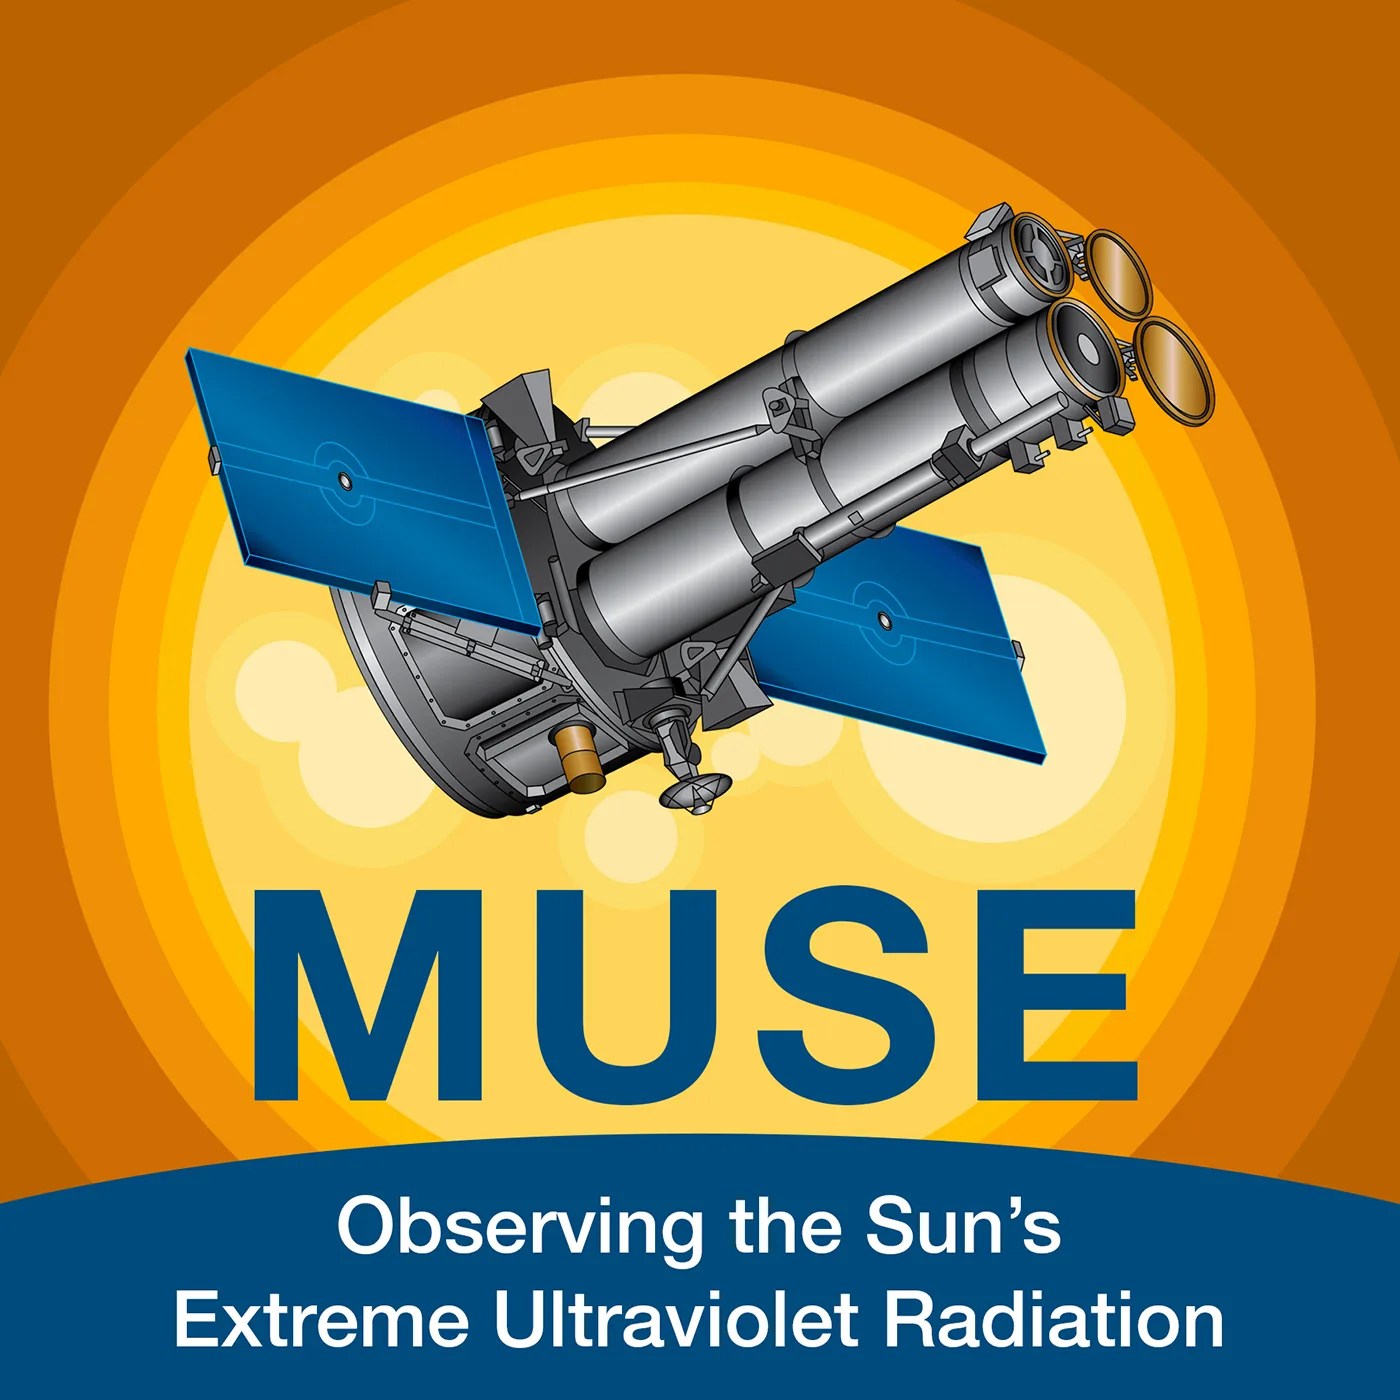 Image of a spacecraft with an illustrated yellow to orange gradient sun in the background; the text reads Muse Observing the Sun's Extreme Ultraviolet Radiation